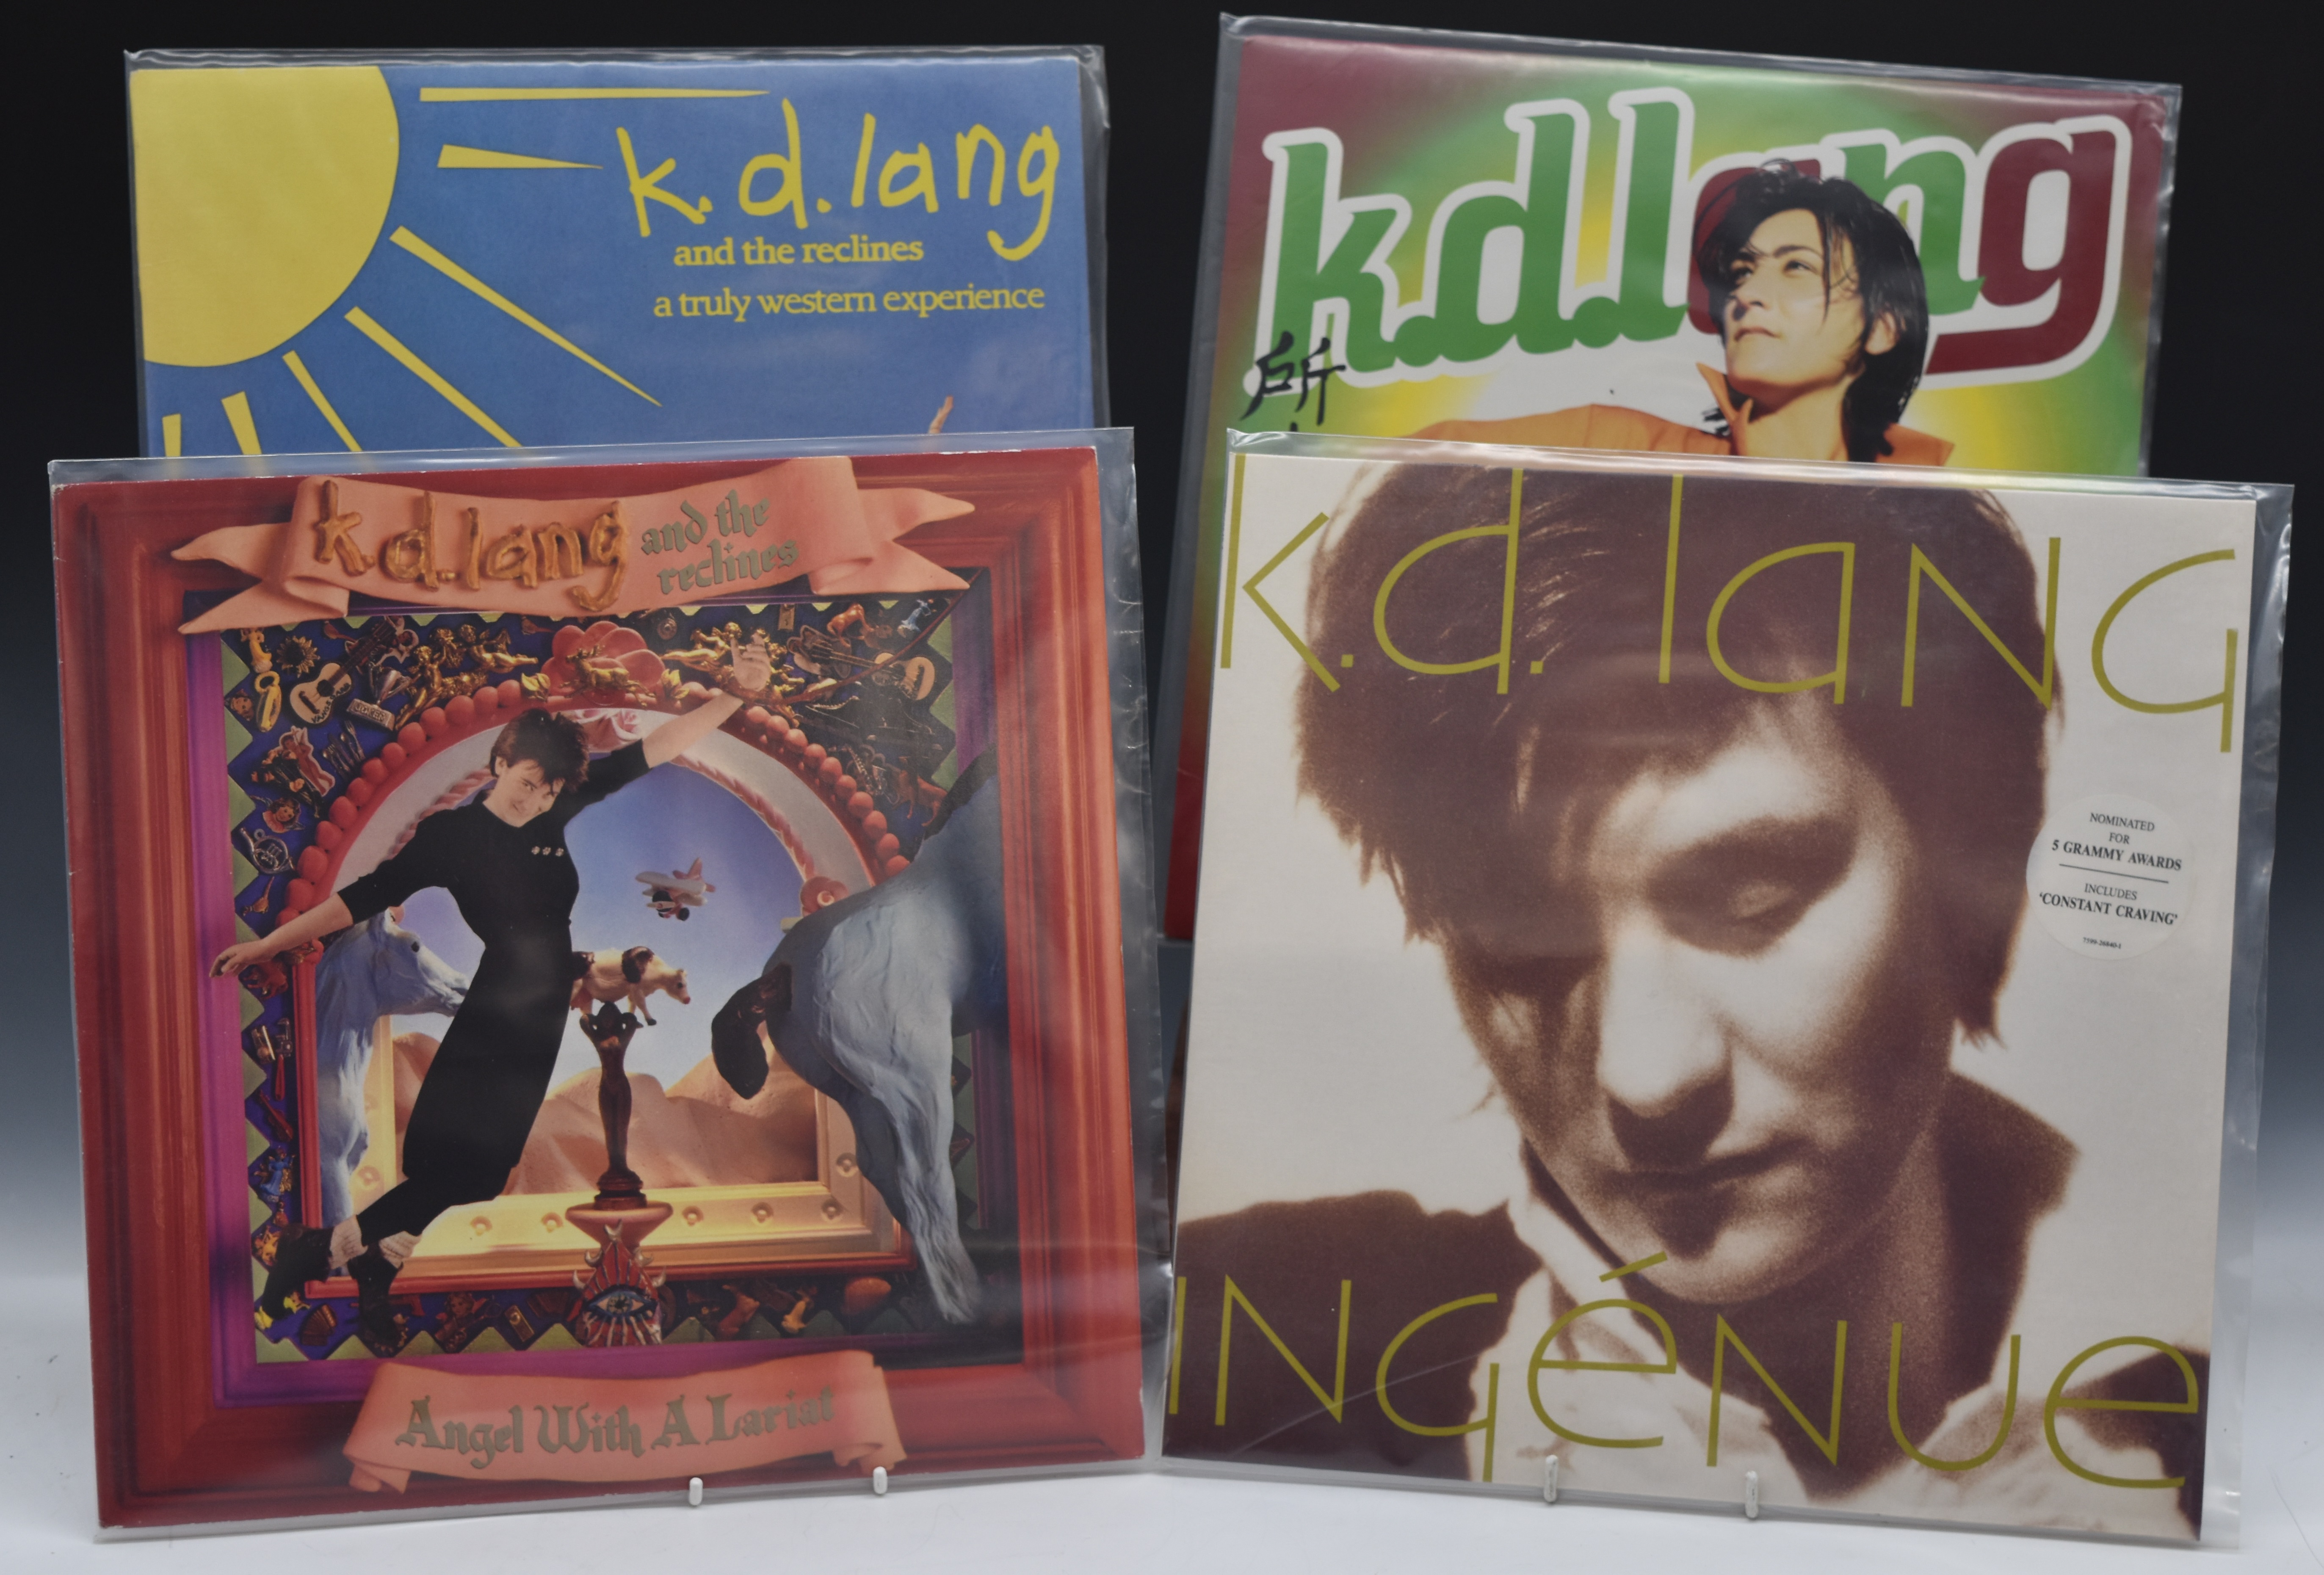 k.d. lang - 18 albums comprising All You Can Eat, Ingènue (4), A Truly Western Experience (3), Angel